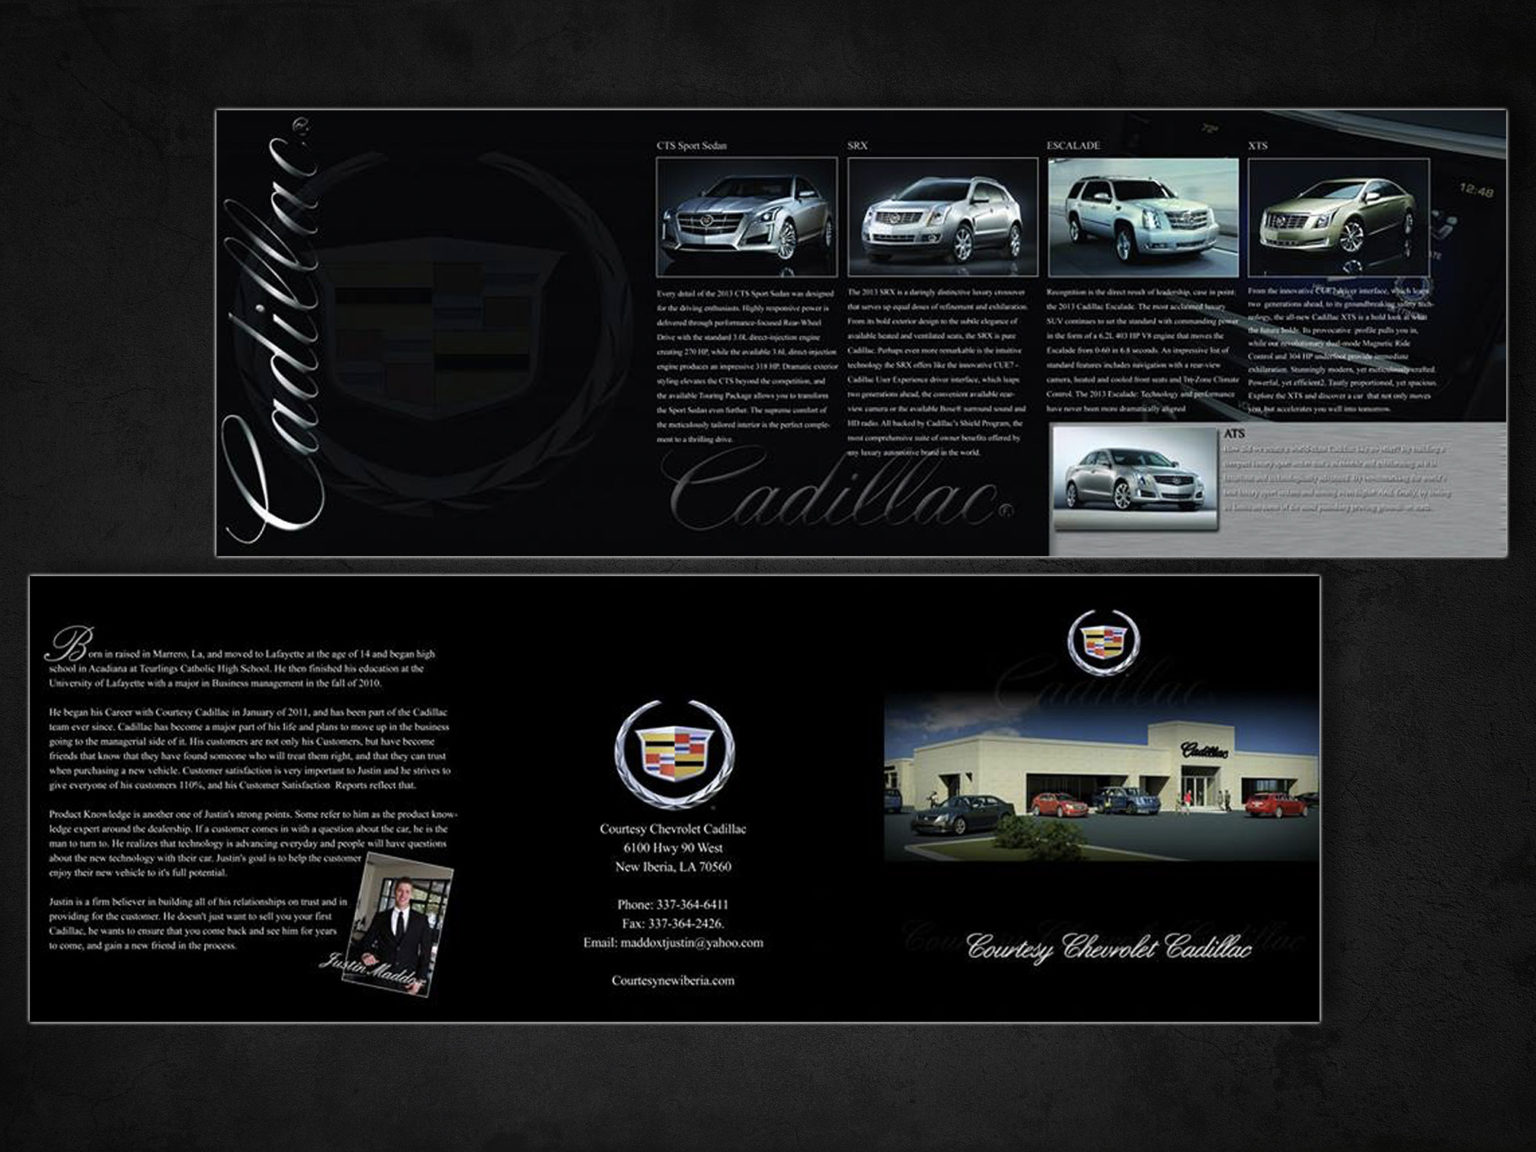 Courtesy Chevolet Cadillac Marketing Brochure • Designed by: Designs In Motion, Inc.